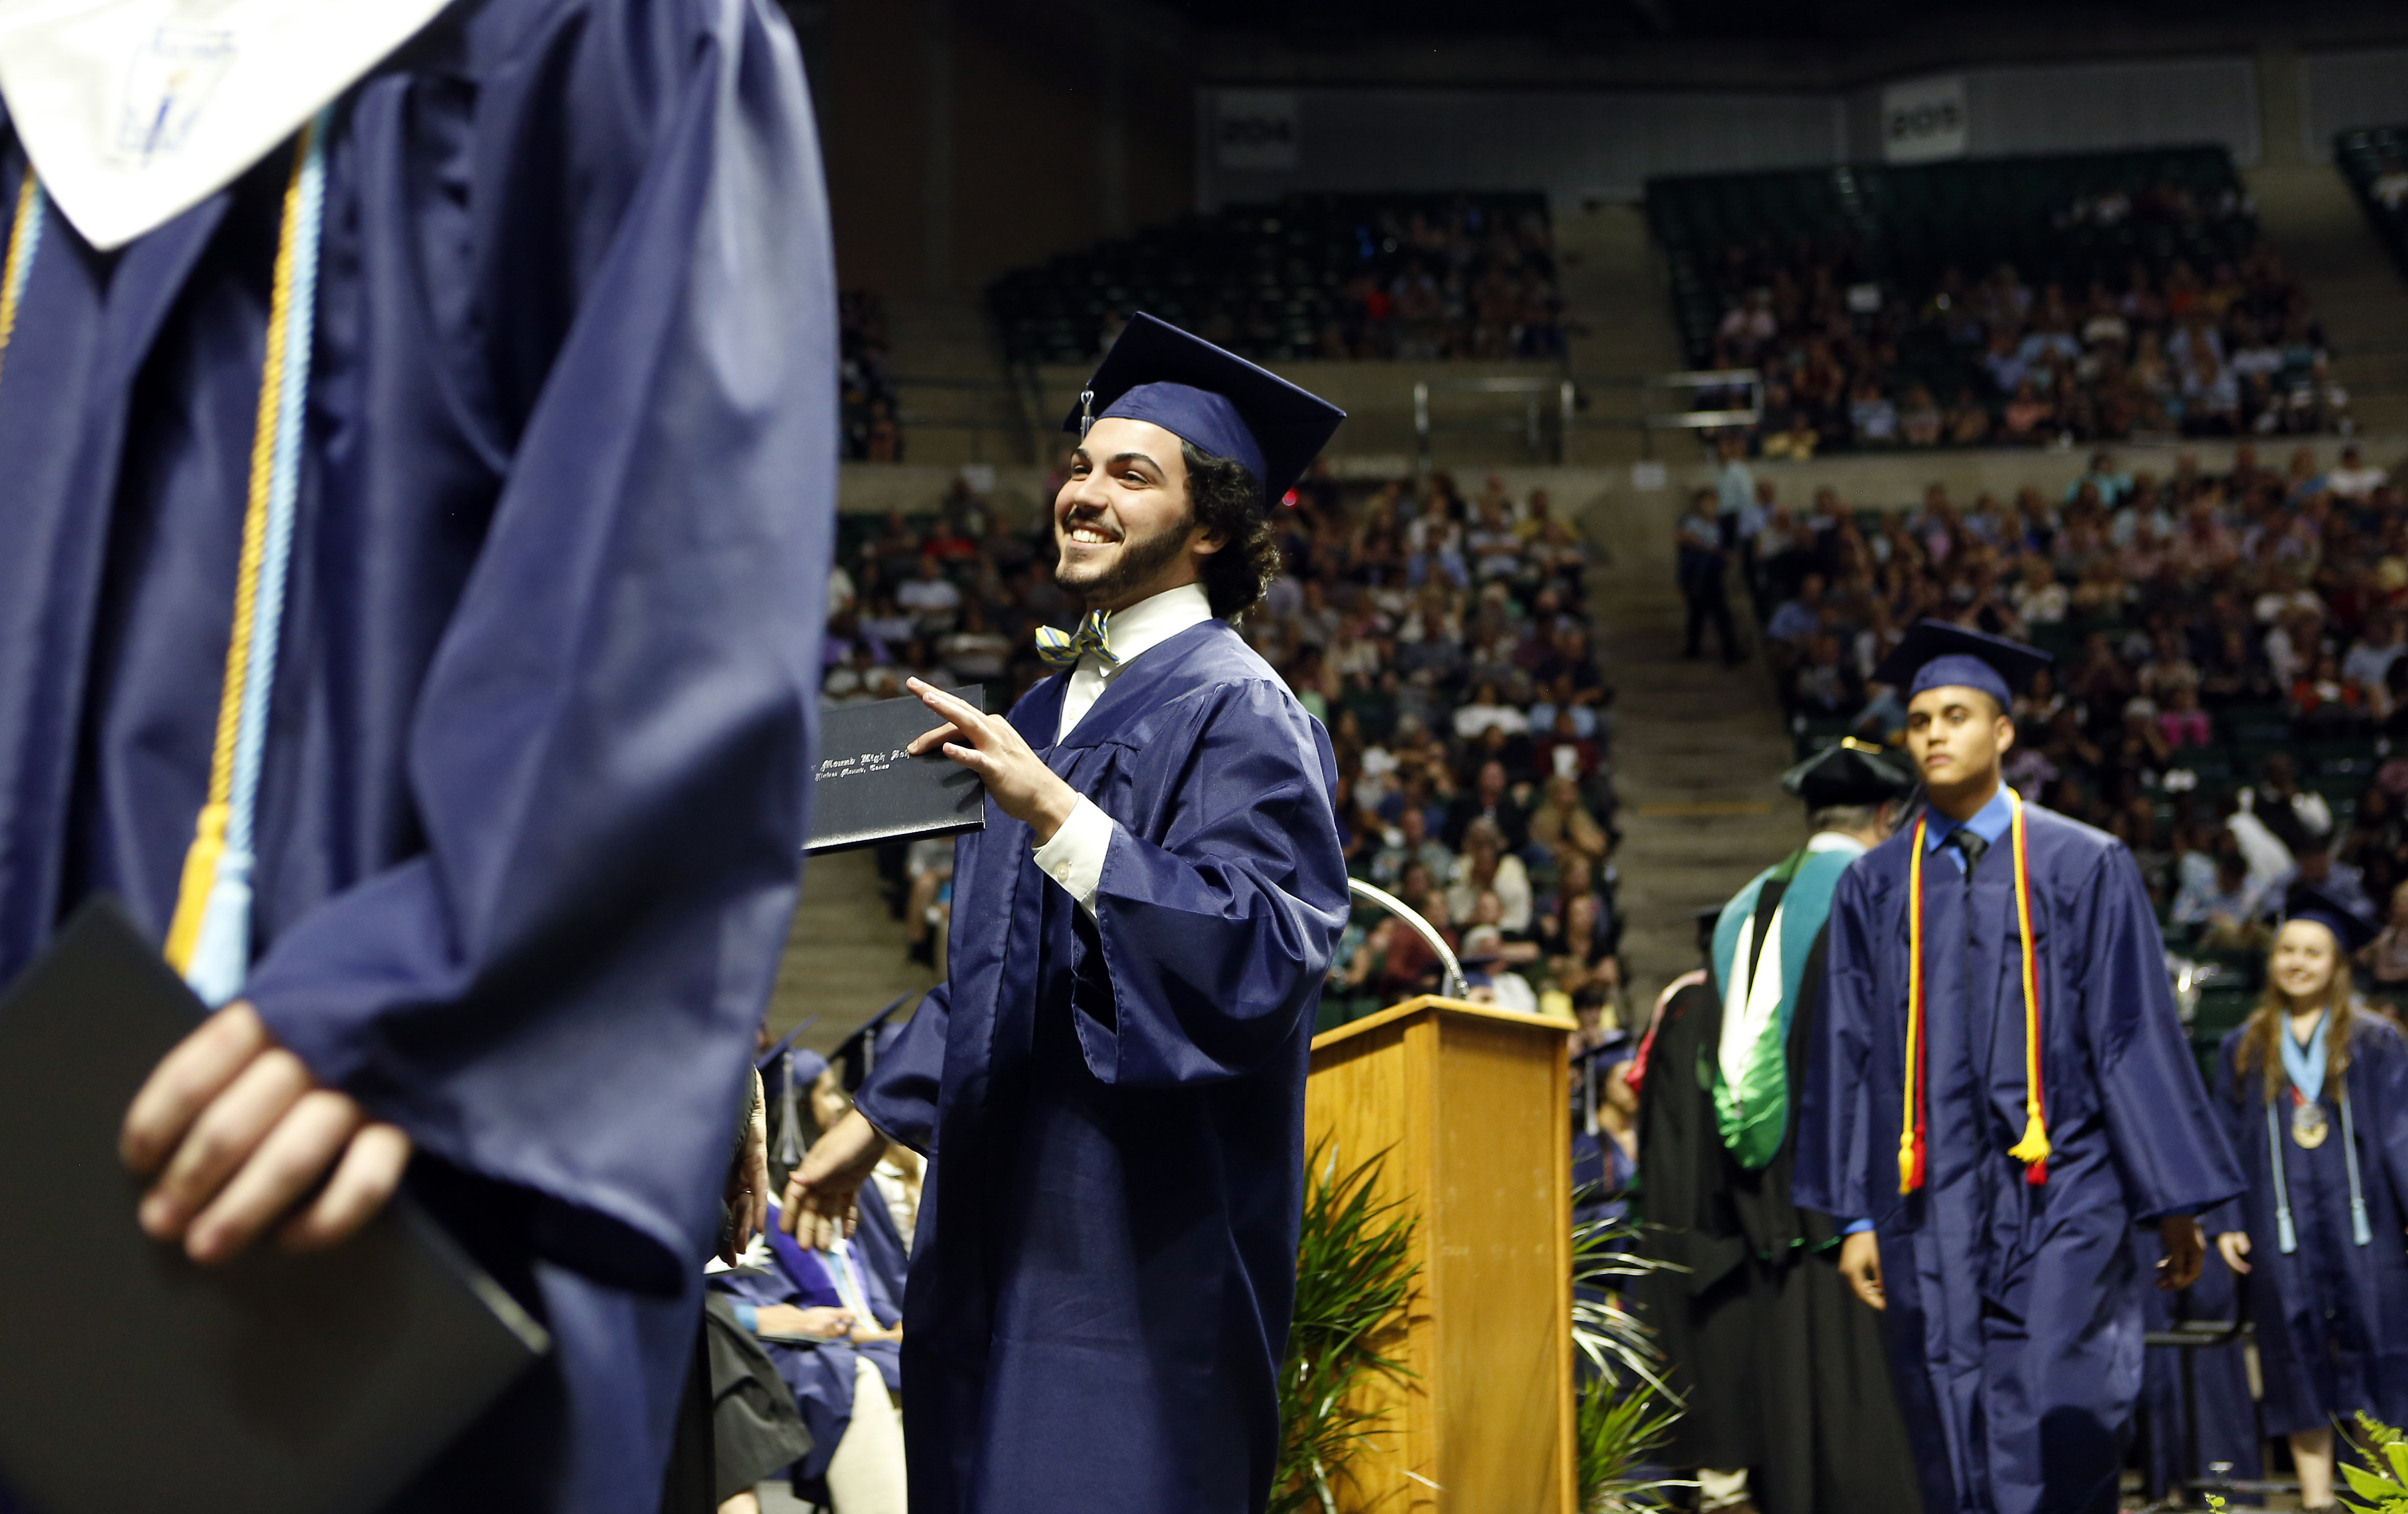 Ricky Rijos Jr. receives his diploma while walking the stage during his graduation from Flower Mound High School at UNT Coliseum in Denton, on Monday, June 6, 2017. (photo © Lara Solt)